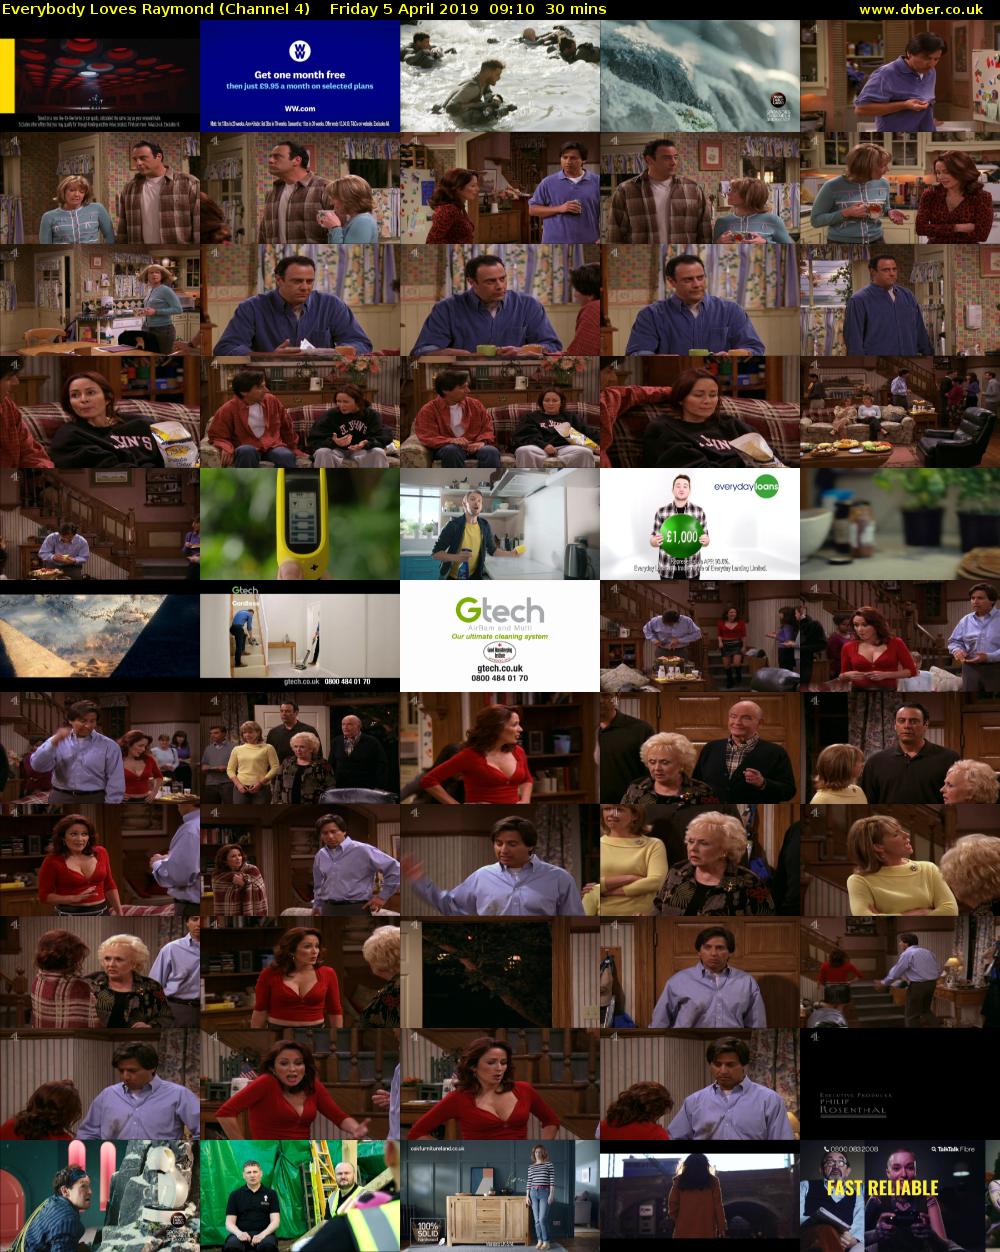 Everybody Loves Raymond (Channel 4) Friday 5 April 2019 09:10 - 09:40